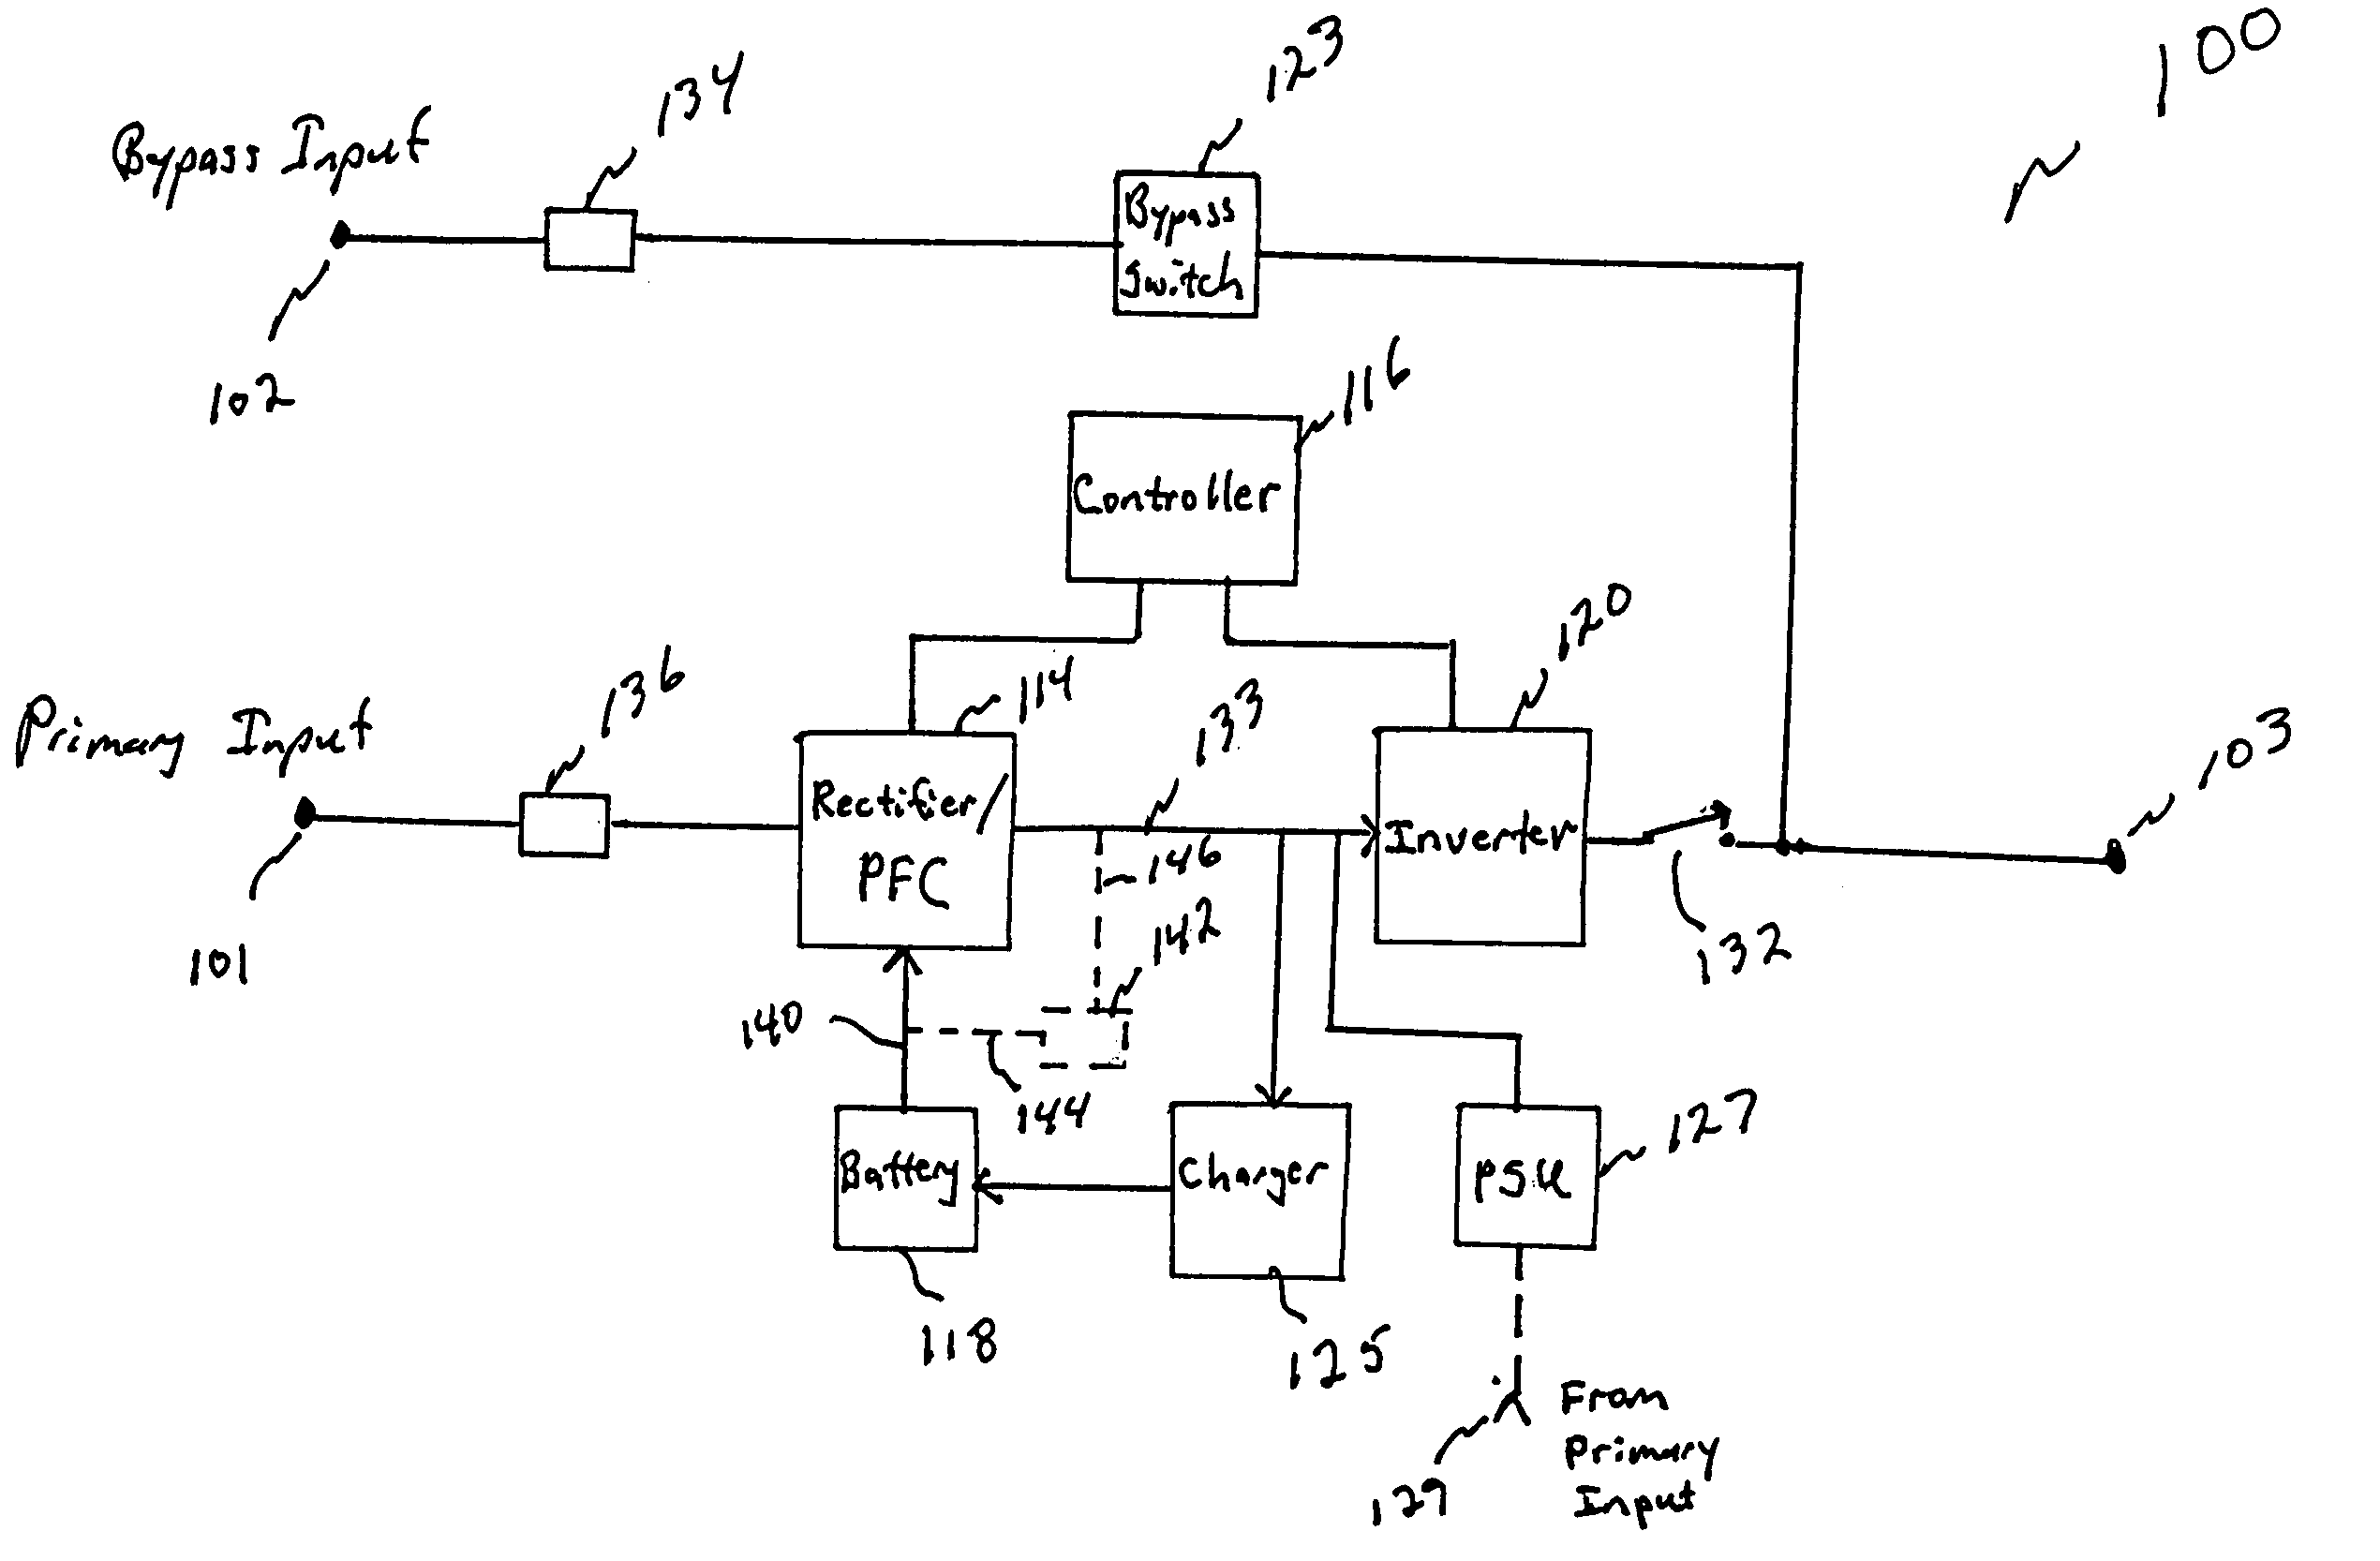 Method and apparatus for providing uninterruptible power